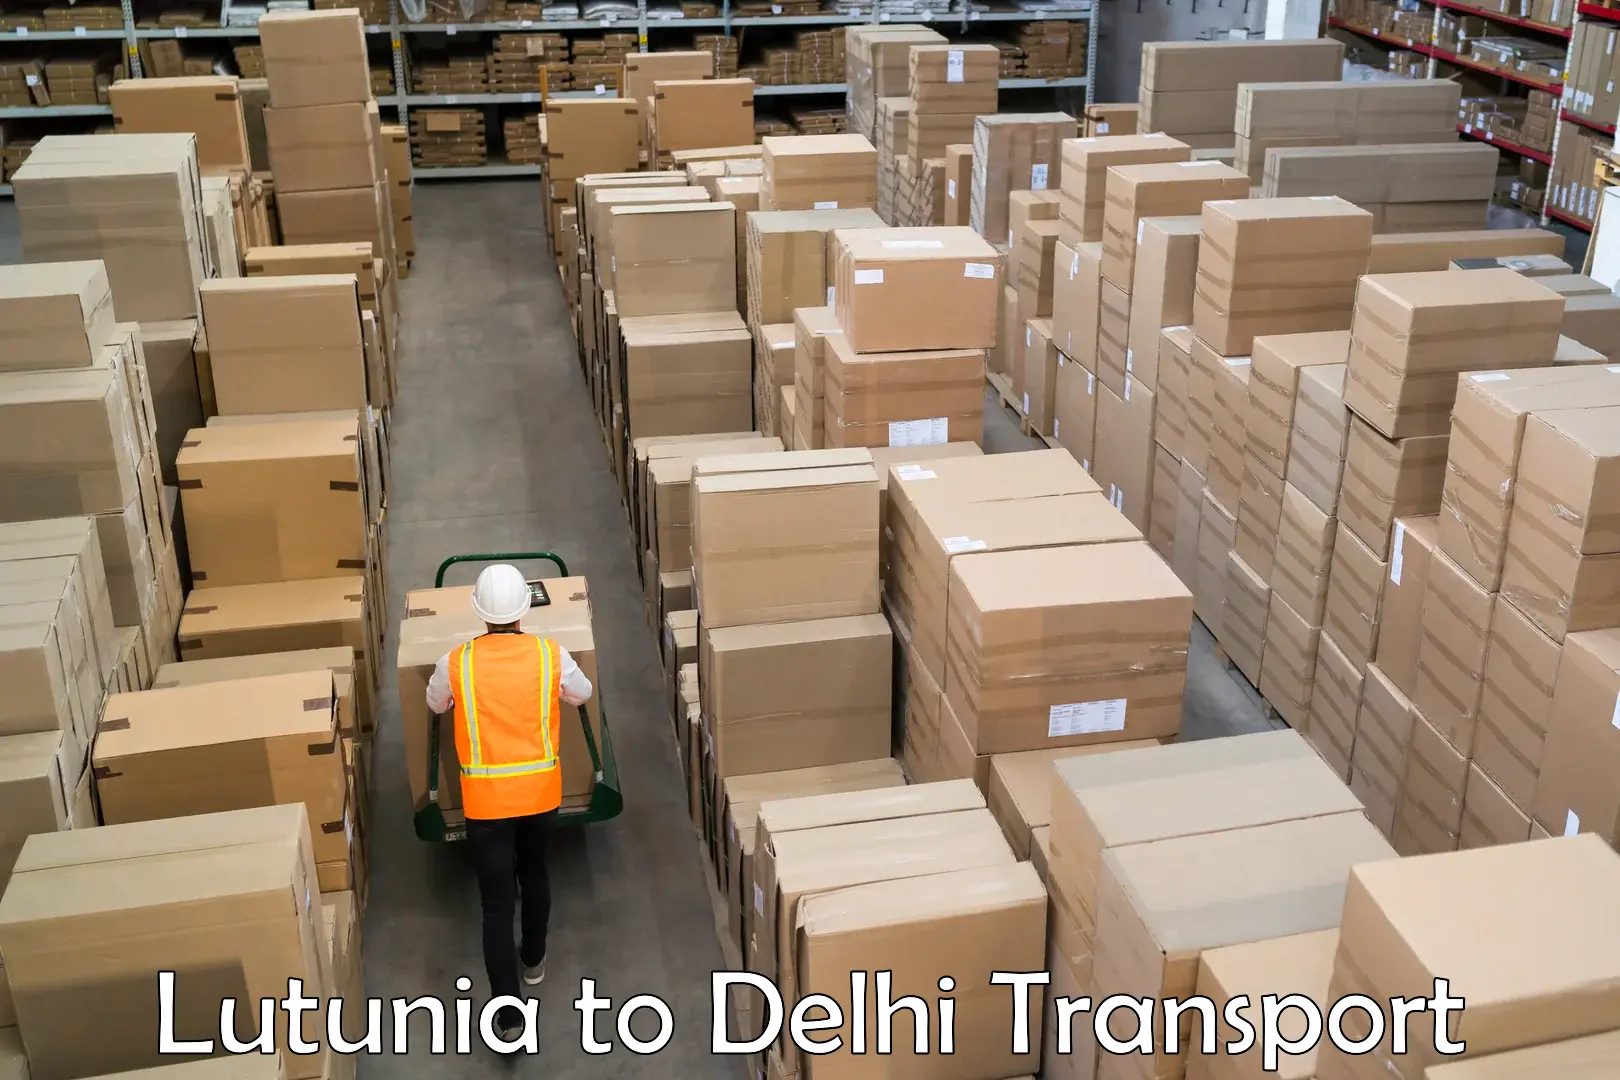 Transport shared services Lutunia to Delhi Technological University DTU